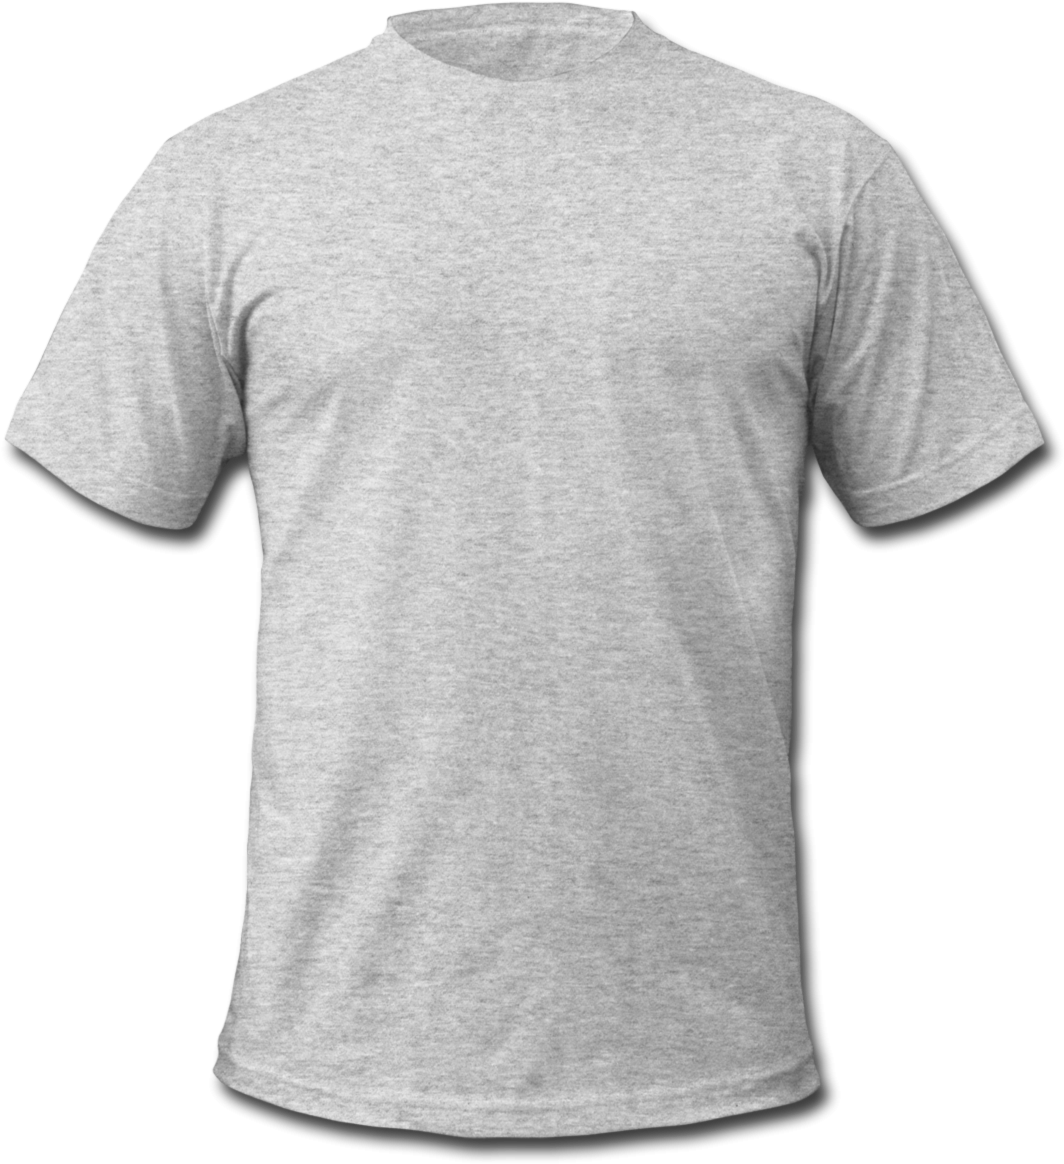 Blank Grey T Shirt Template PNG image